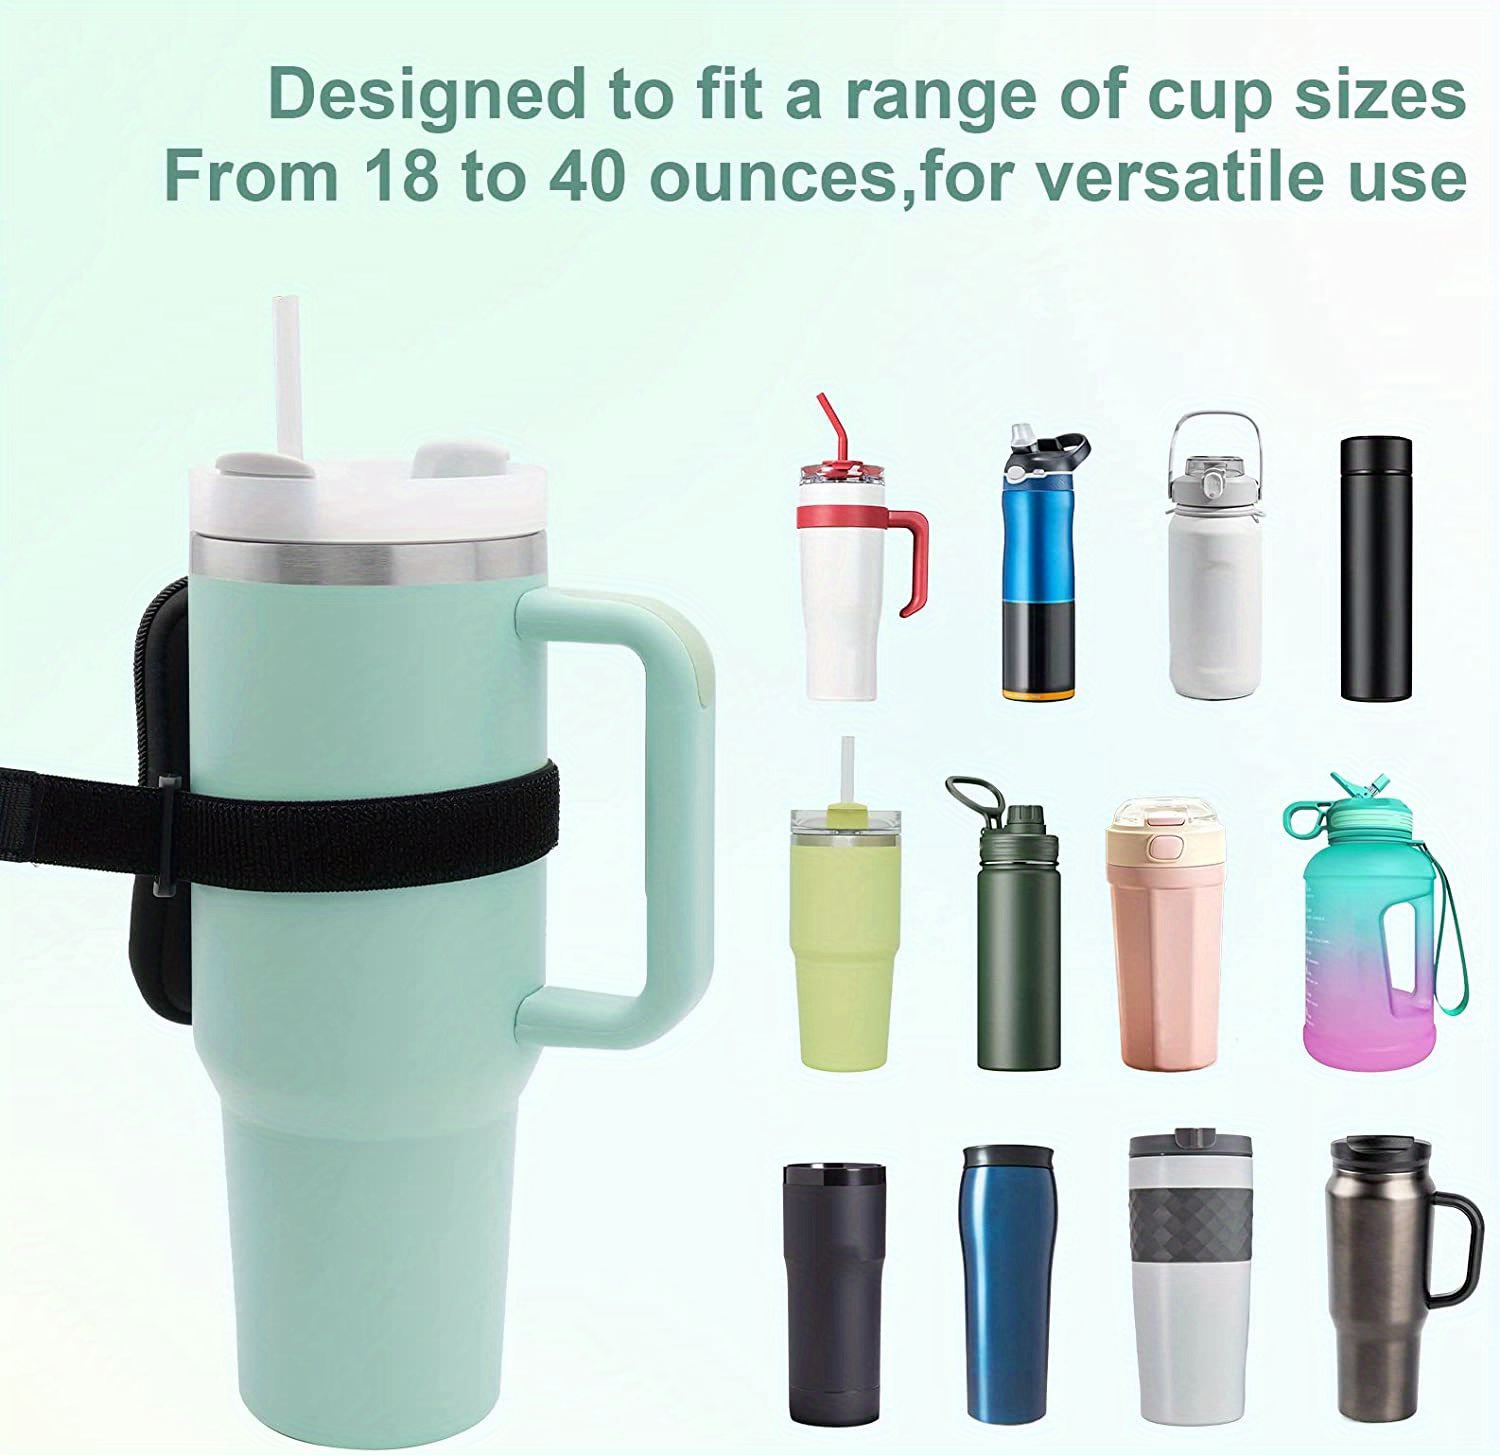 Water Bottle Carrier With Phone Pocket For Stanley Quencher 40 Oz Tumbler  With Handle, Stanley Cup Accessories For Travelling Hiking